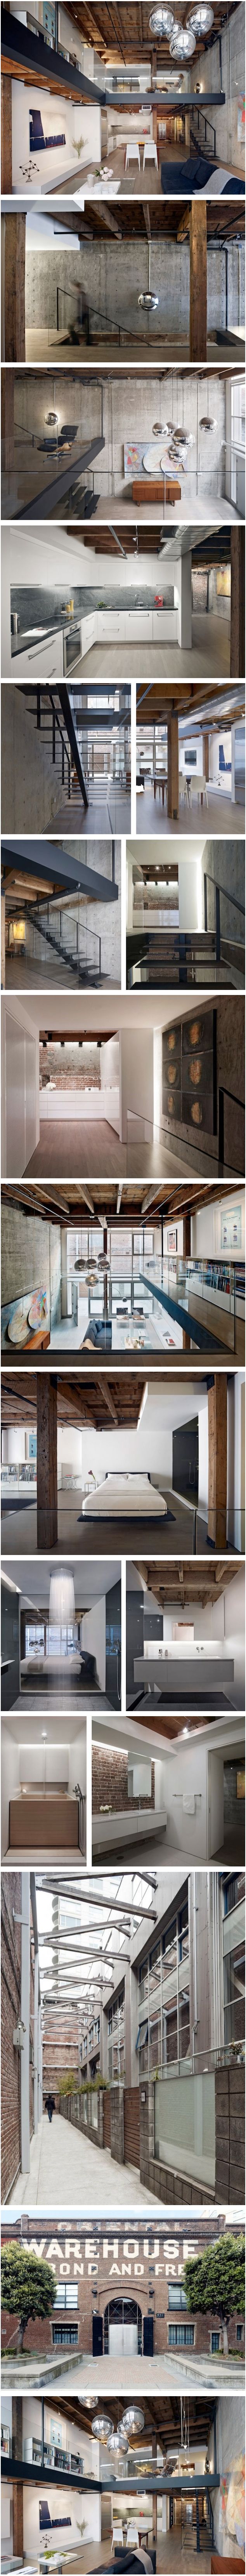 Renovated-Oriental-Warehouse-by-Edmonds-Lee-Architects by chiara stella home